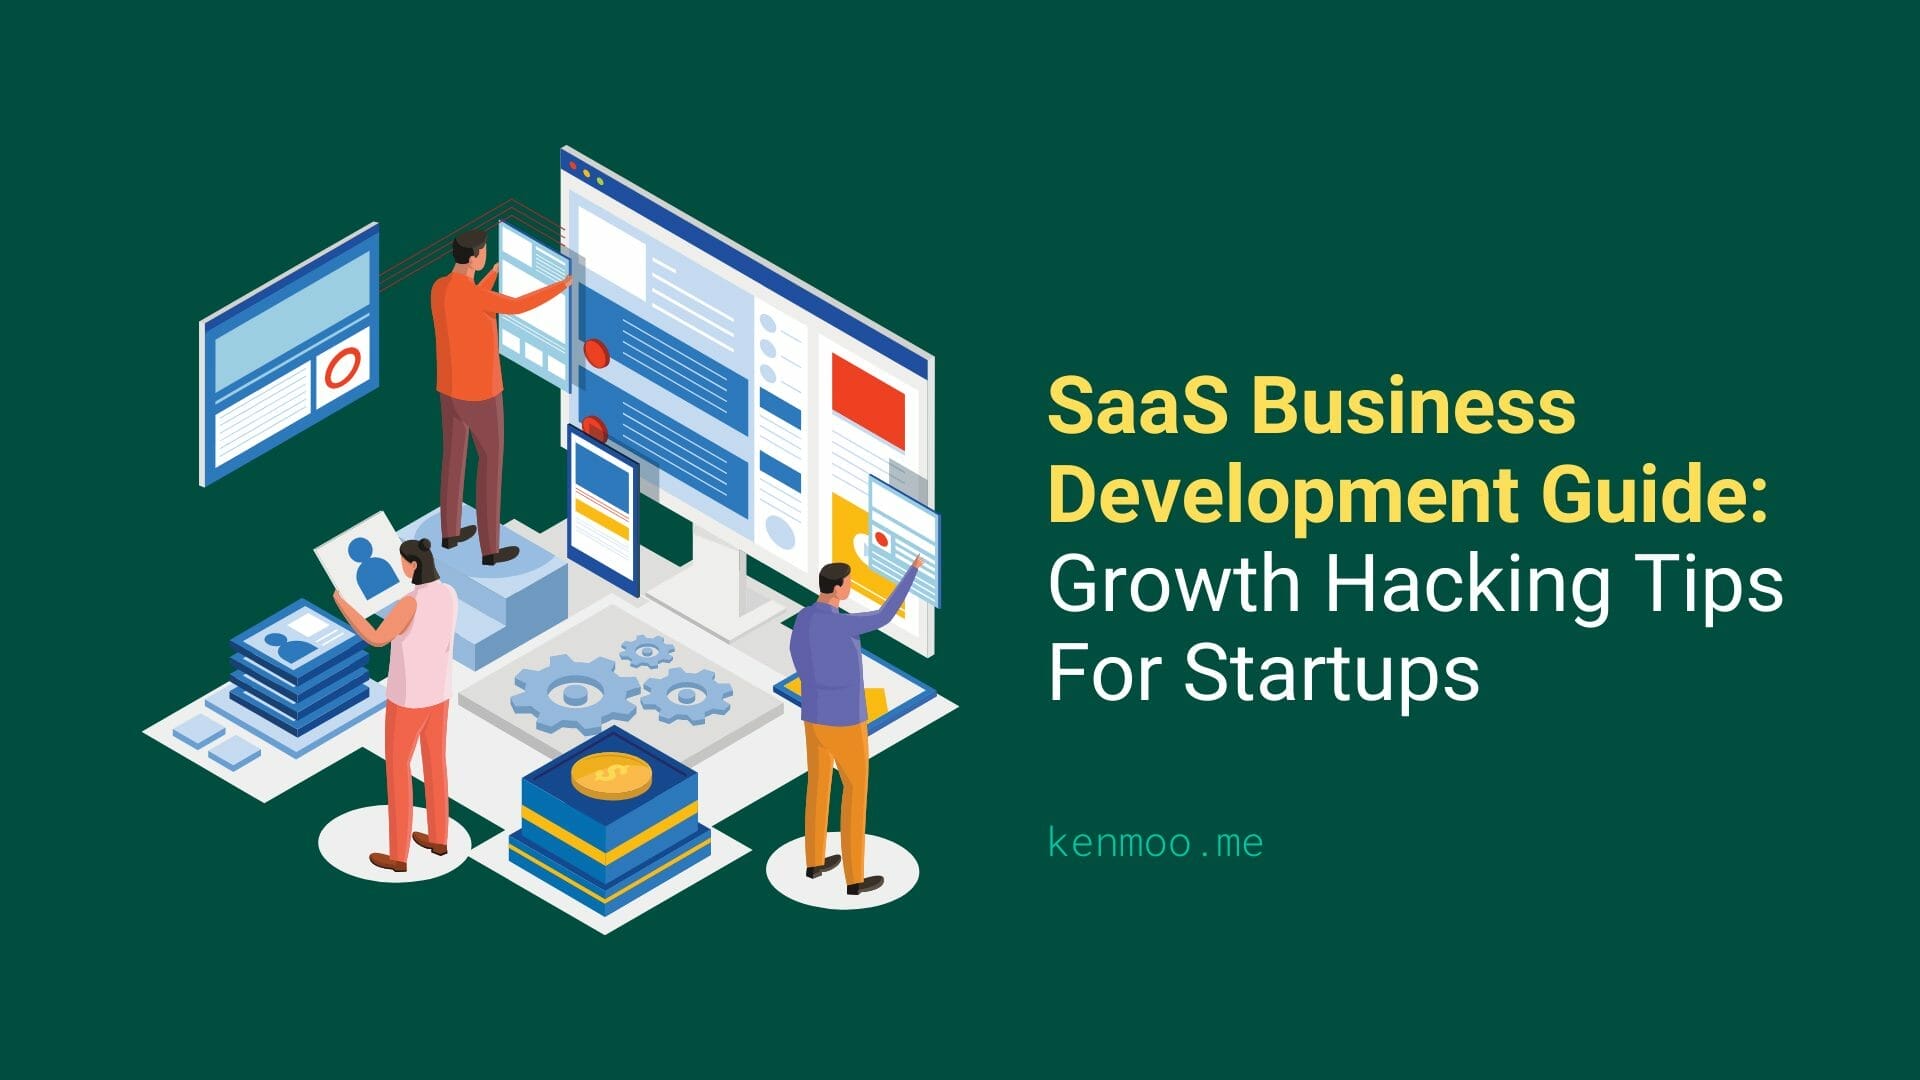 SaaS Business Development Guide: Growth Hacking Tips For Startups